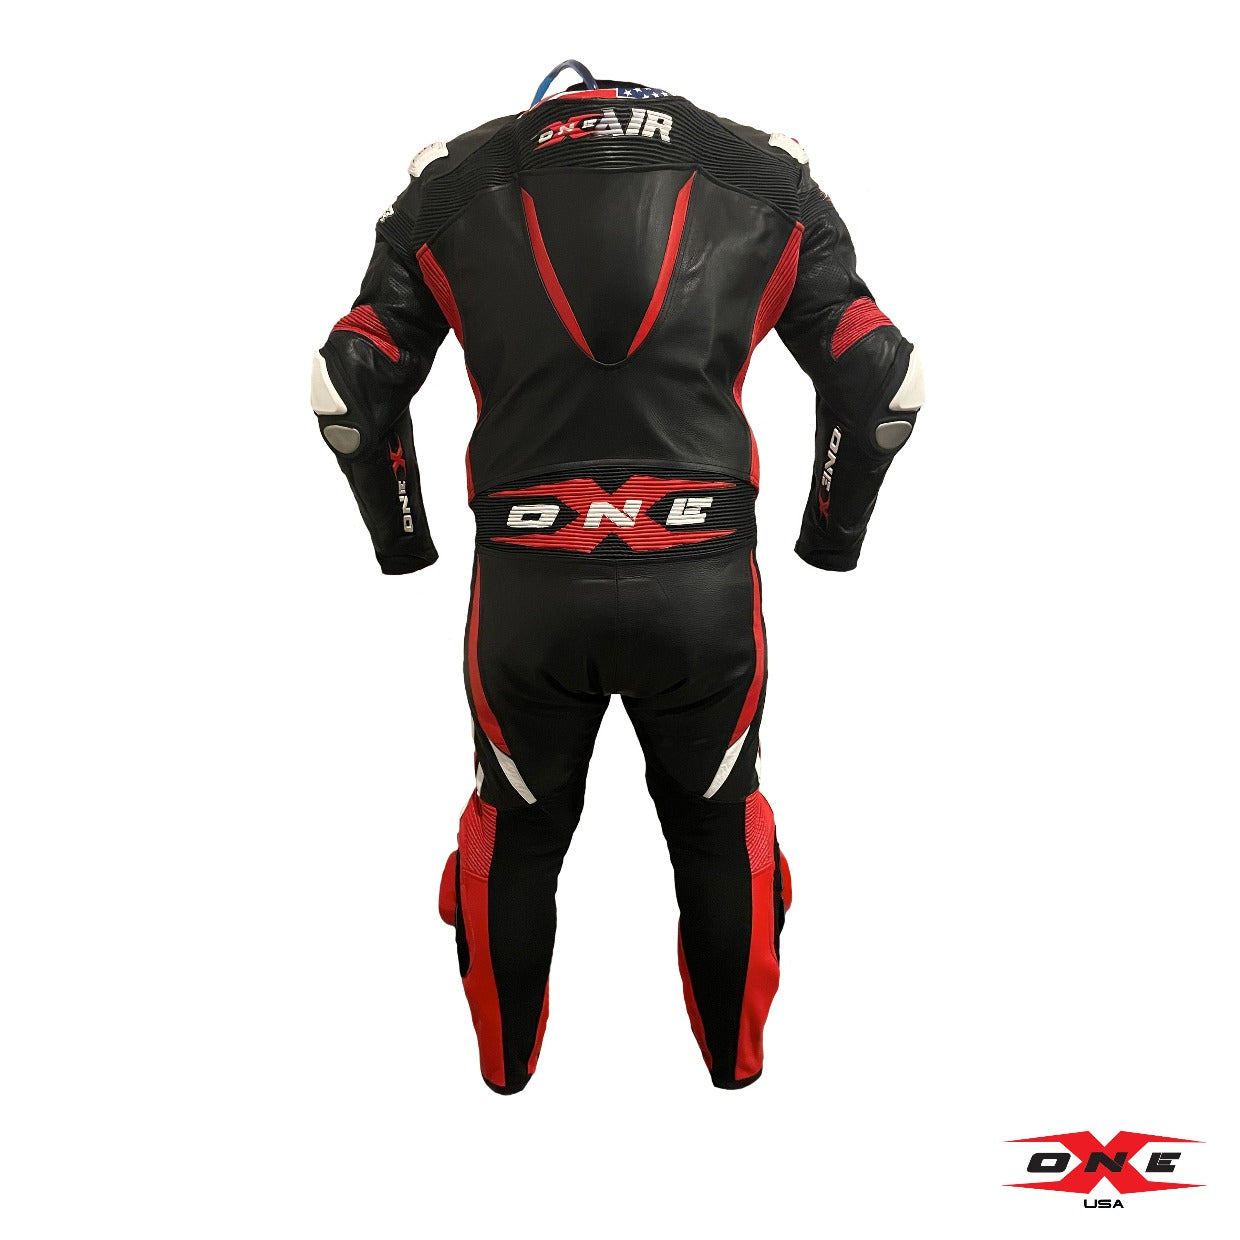 OneX USA XR22 Airbag Ready Pro Race Suit - Black/Red